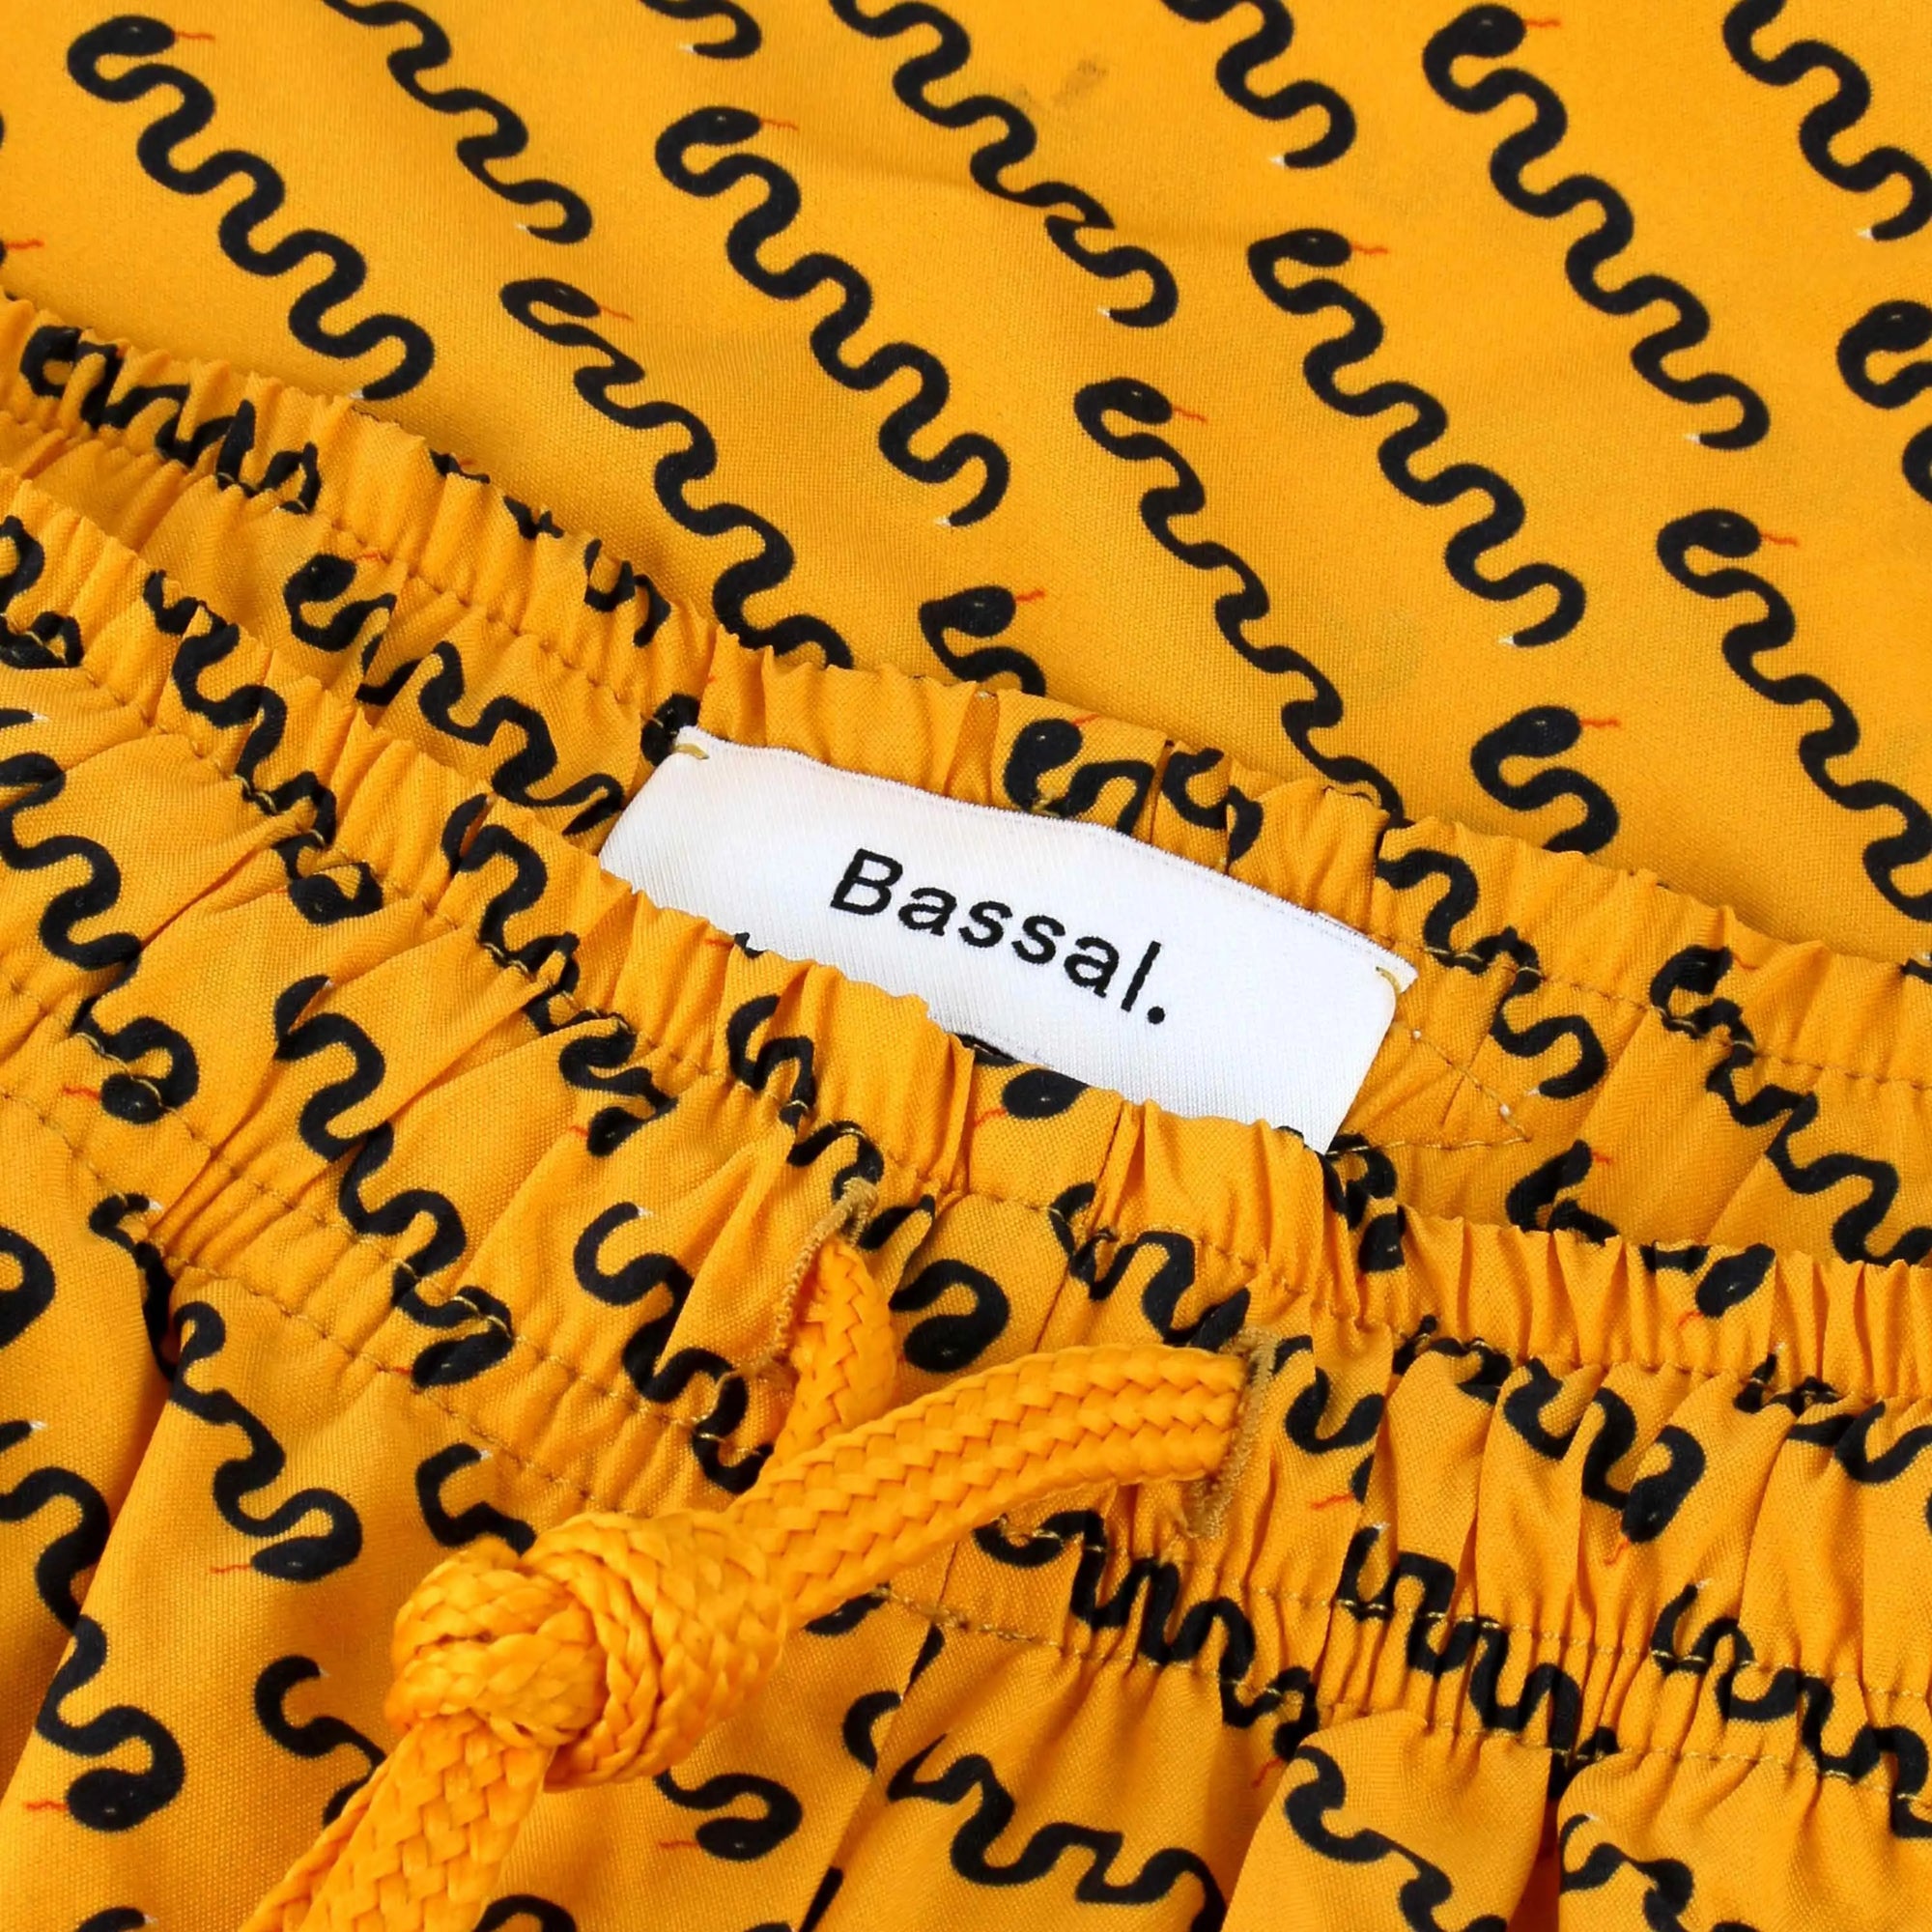 An open white box from bassalstore reveals a folded yellow Mamba Swimwear patterned with dark squiggly lines. The Mamba Swimwear has a blue drawstring and two tags: one reads "Bassal." and the other says, "proudly made for you to wear." The box lid proudly displays the brand name "Bassal" from Barcelona.